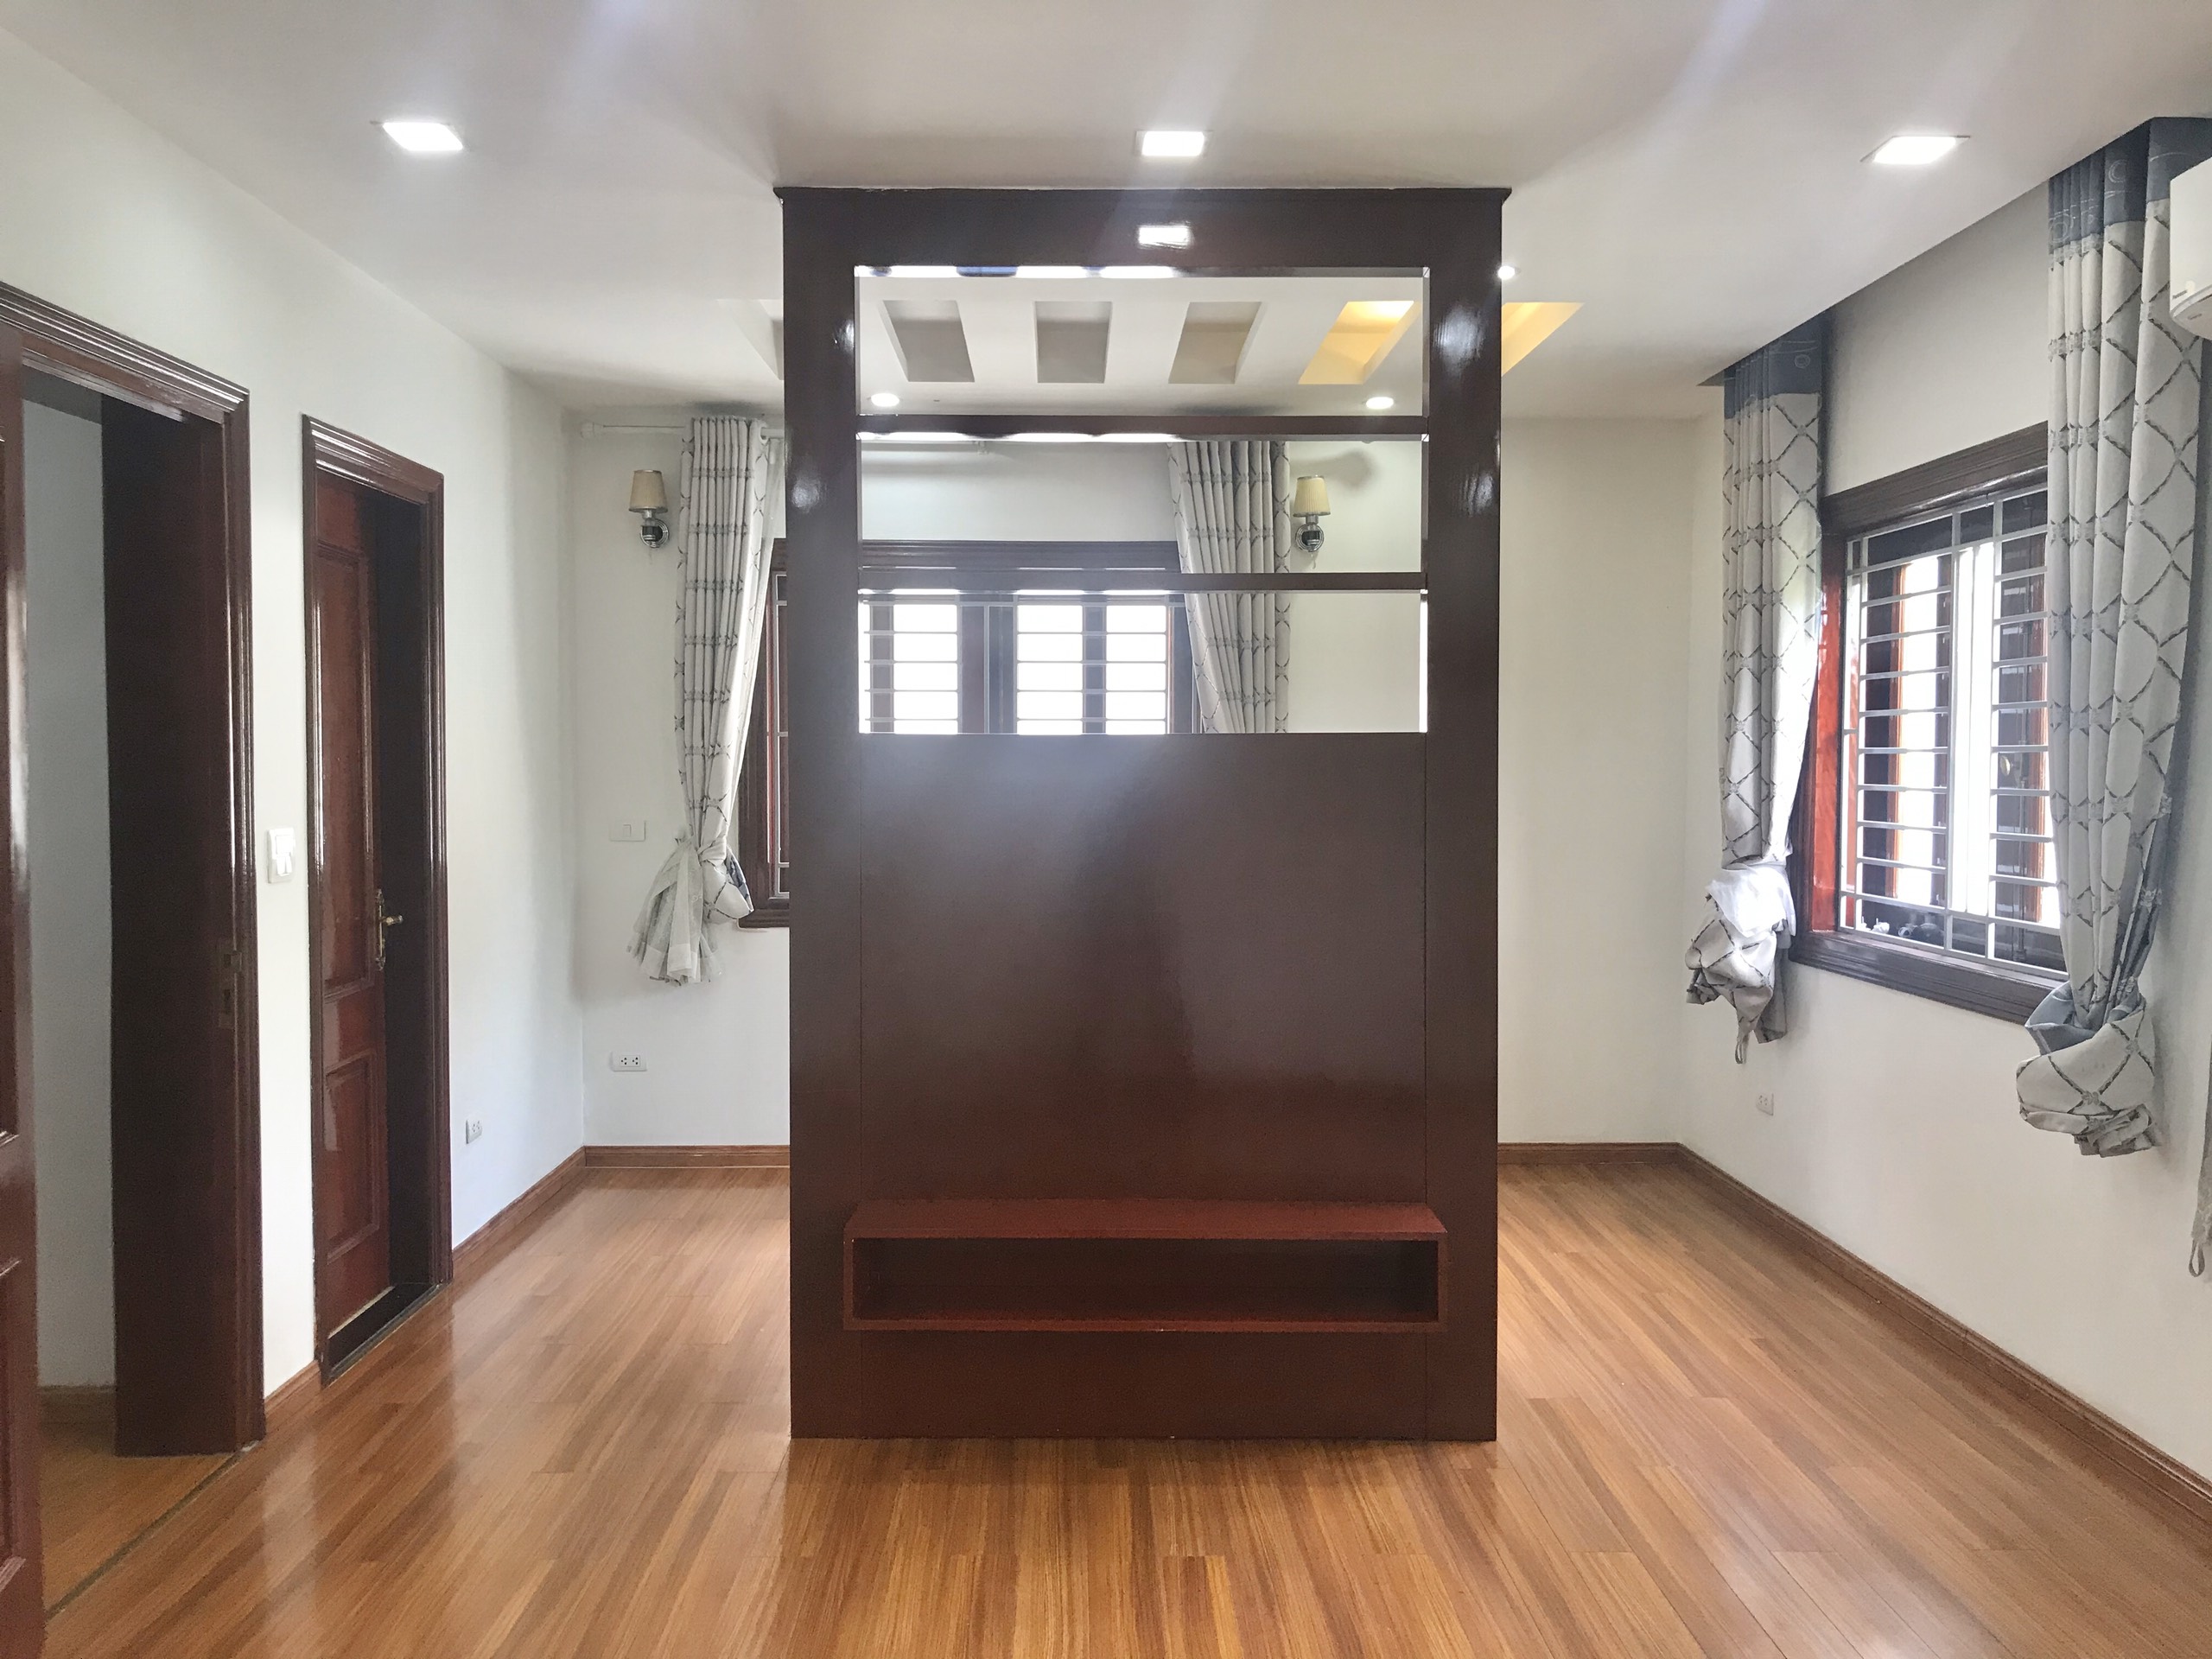 HOA PHUONG VINHOMES RIVERSIDE VILLAS FOR SALE WITH 4BR 19